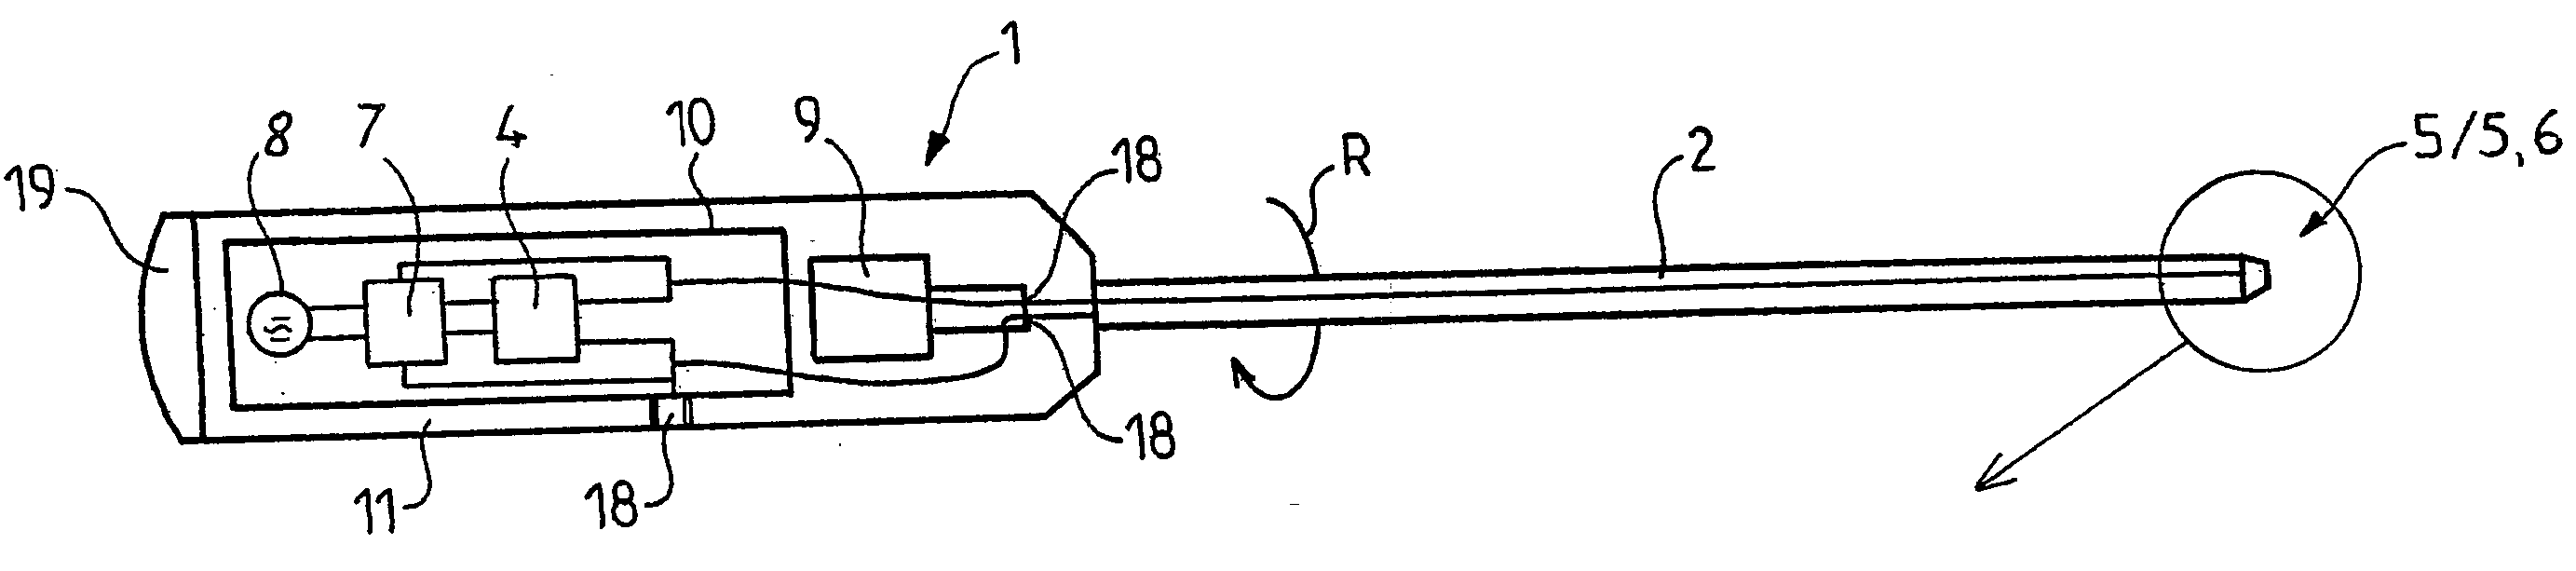 Device for monitoring penetration into anatomical members